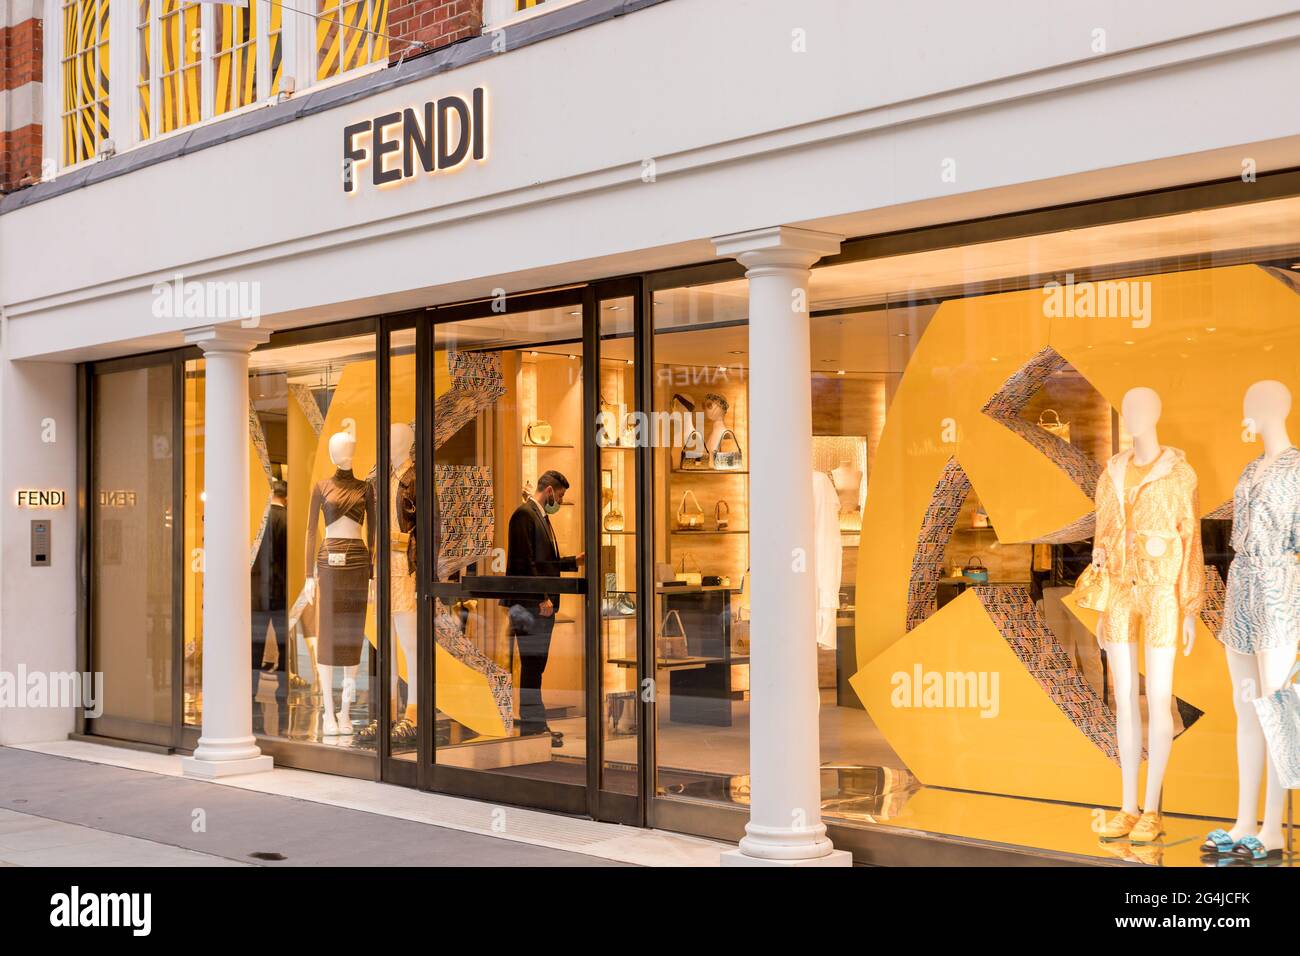 London, UK. 22nd June, 2021. Fendi logo is seen at one of their stores ...